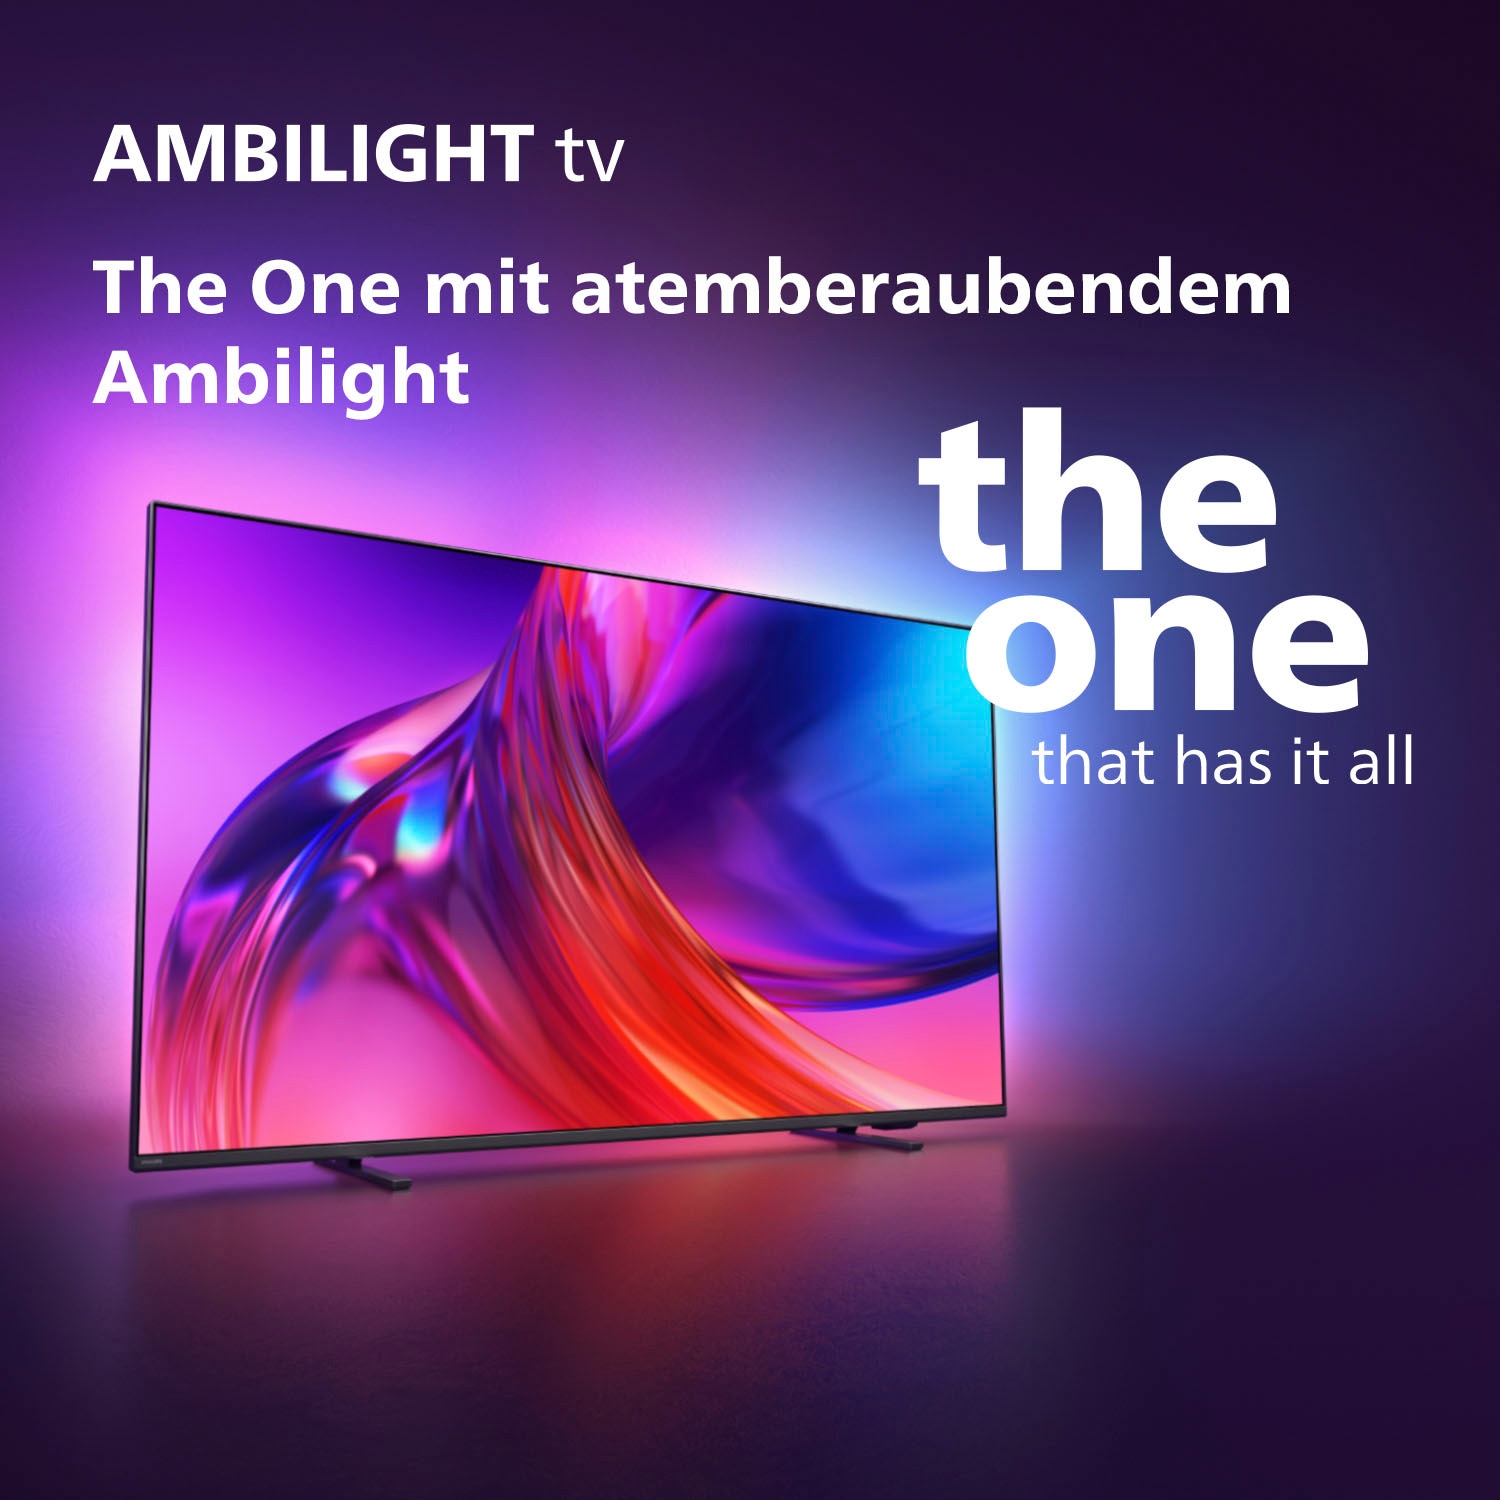 Philips LED-Fernseher, 126 cm/50 Zoll, 4K Ultra HD, Android TV-Google TV-Smart-TV, 3-seitiges Ambilight